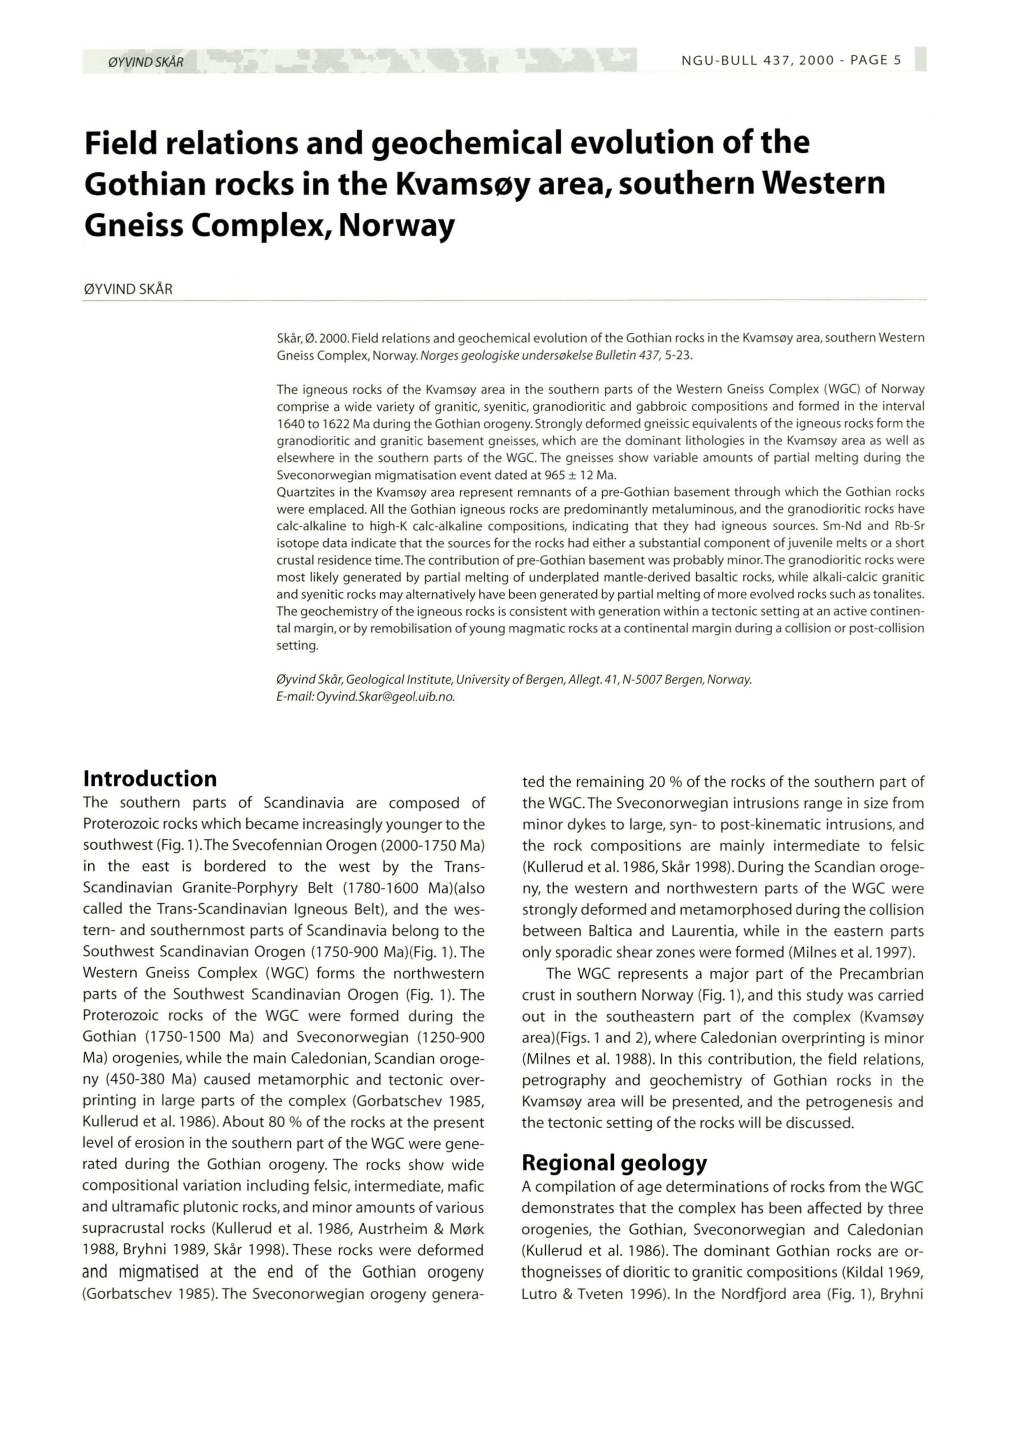 Field Relations and Geochemical Evolution of the Gothian Rocks in the Kvams0y Area, Southern Western Gneiss Complex, Norway